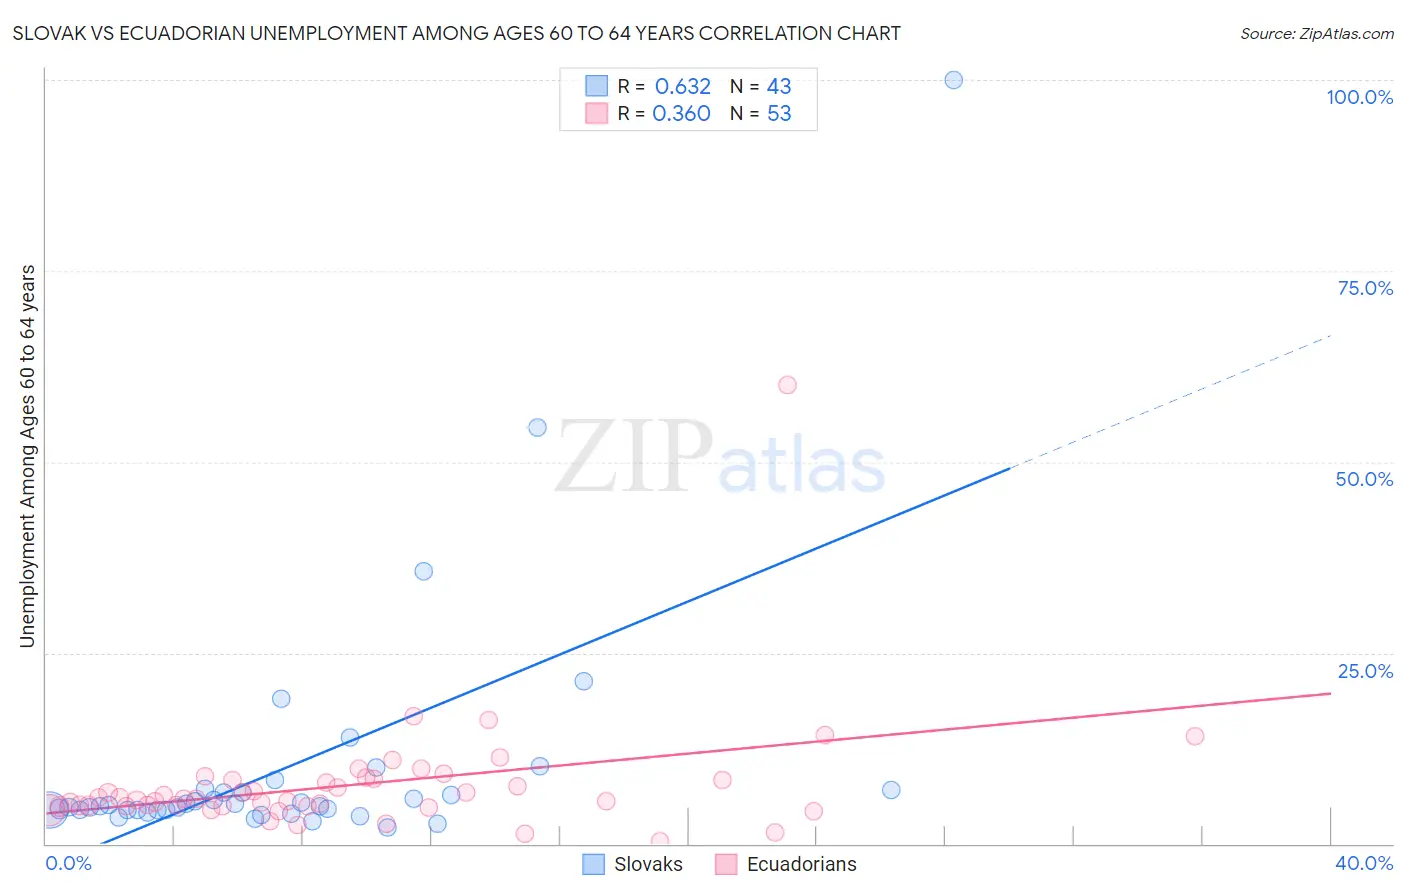 Slovak vs Ecuadorian Unemployment Among Ages 60 to 64 years